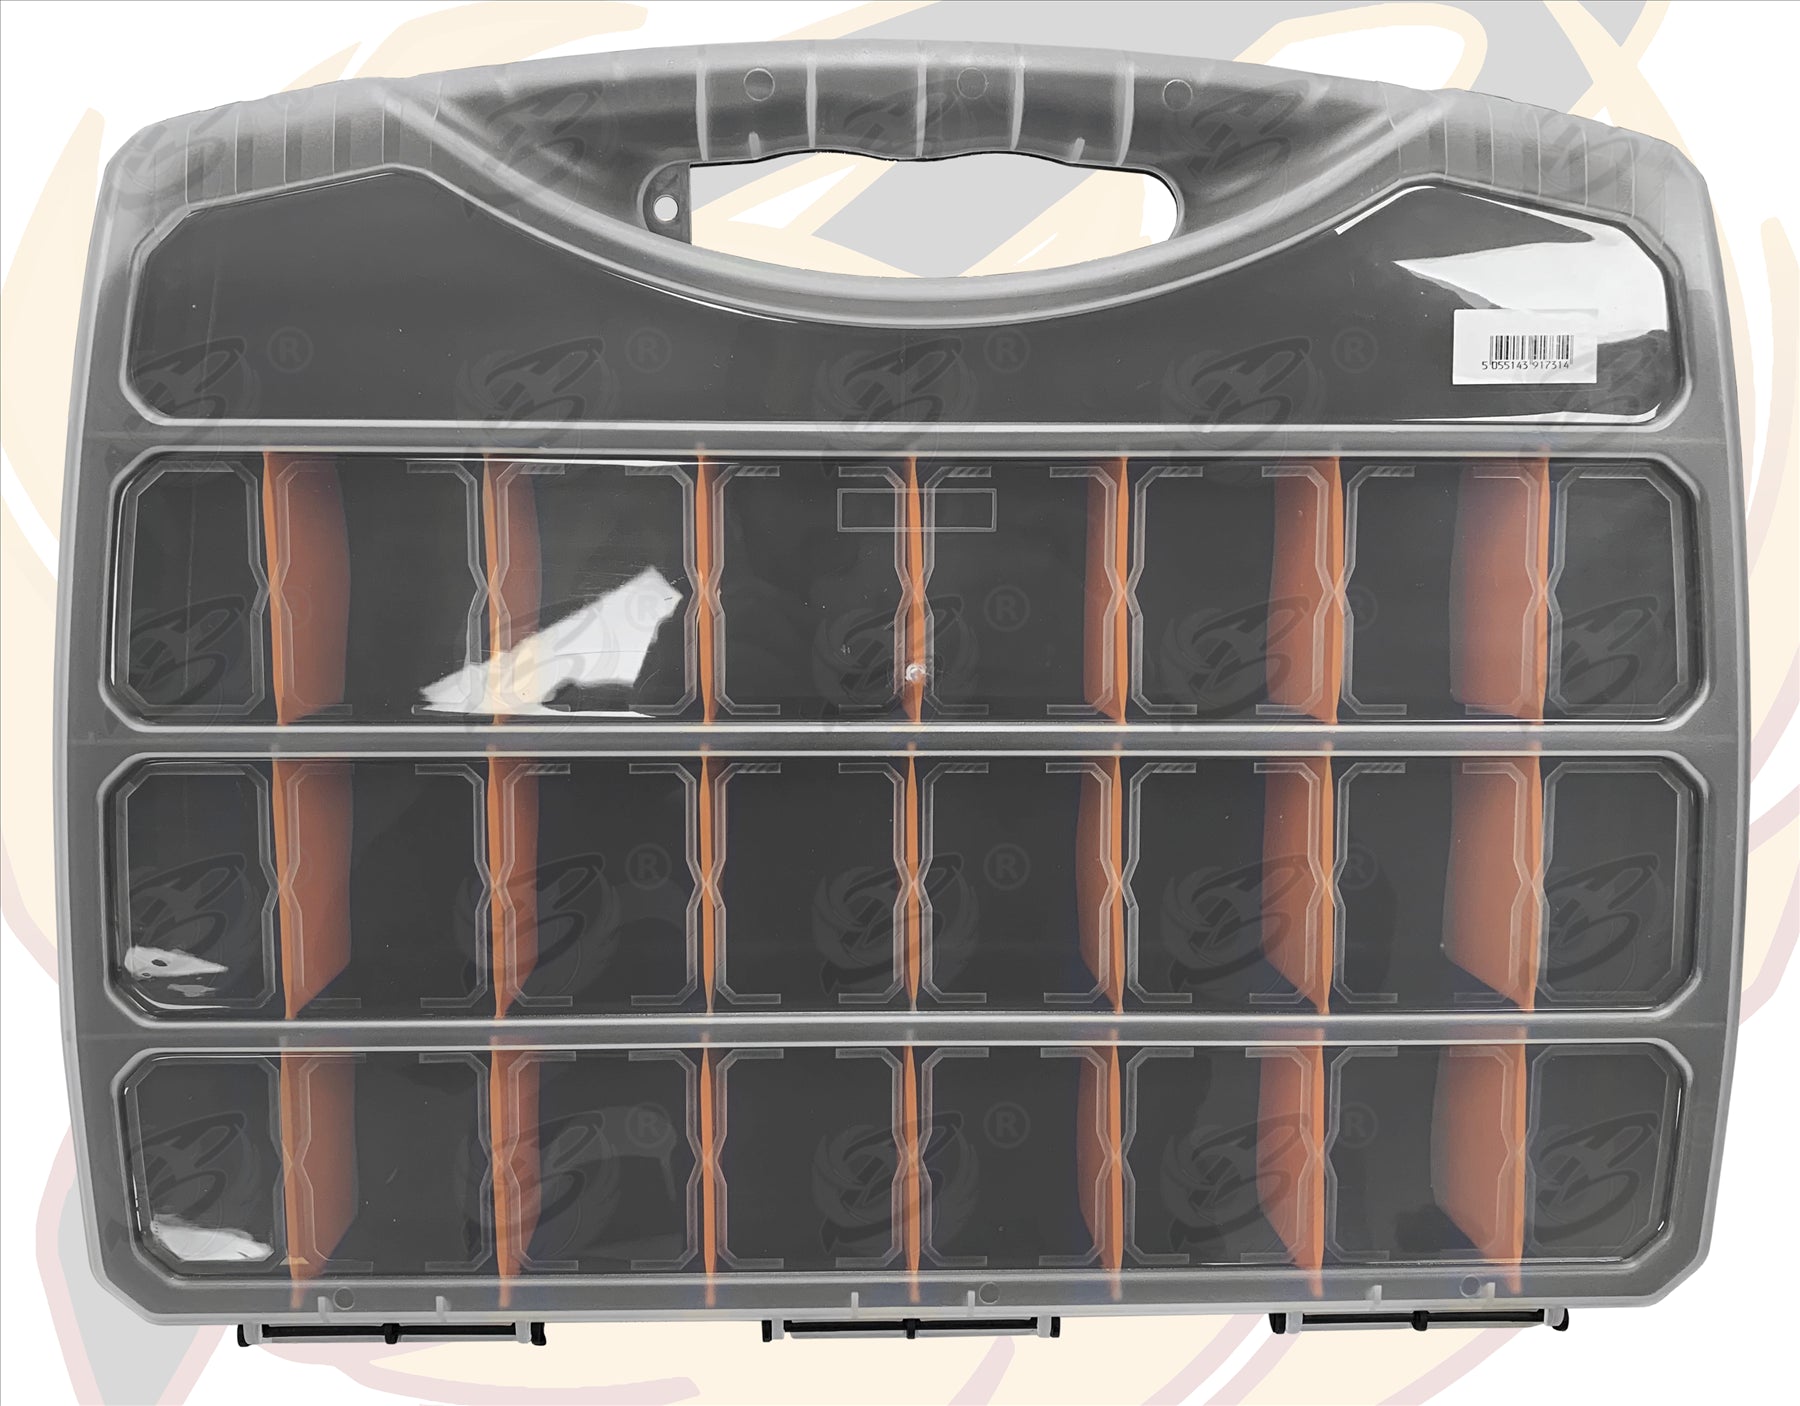 TOOLZONE DIY ORGANISER 22 COMPARTMENTS ( 480MM WIDE )